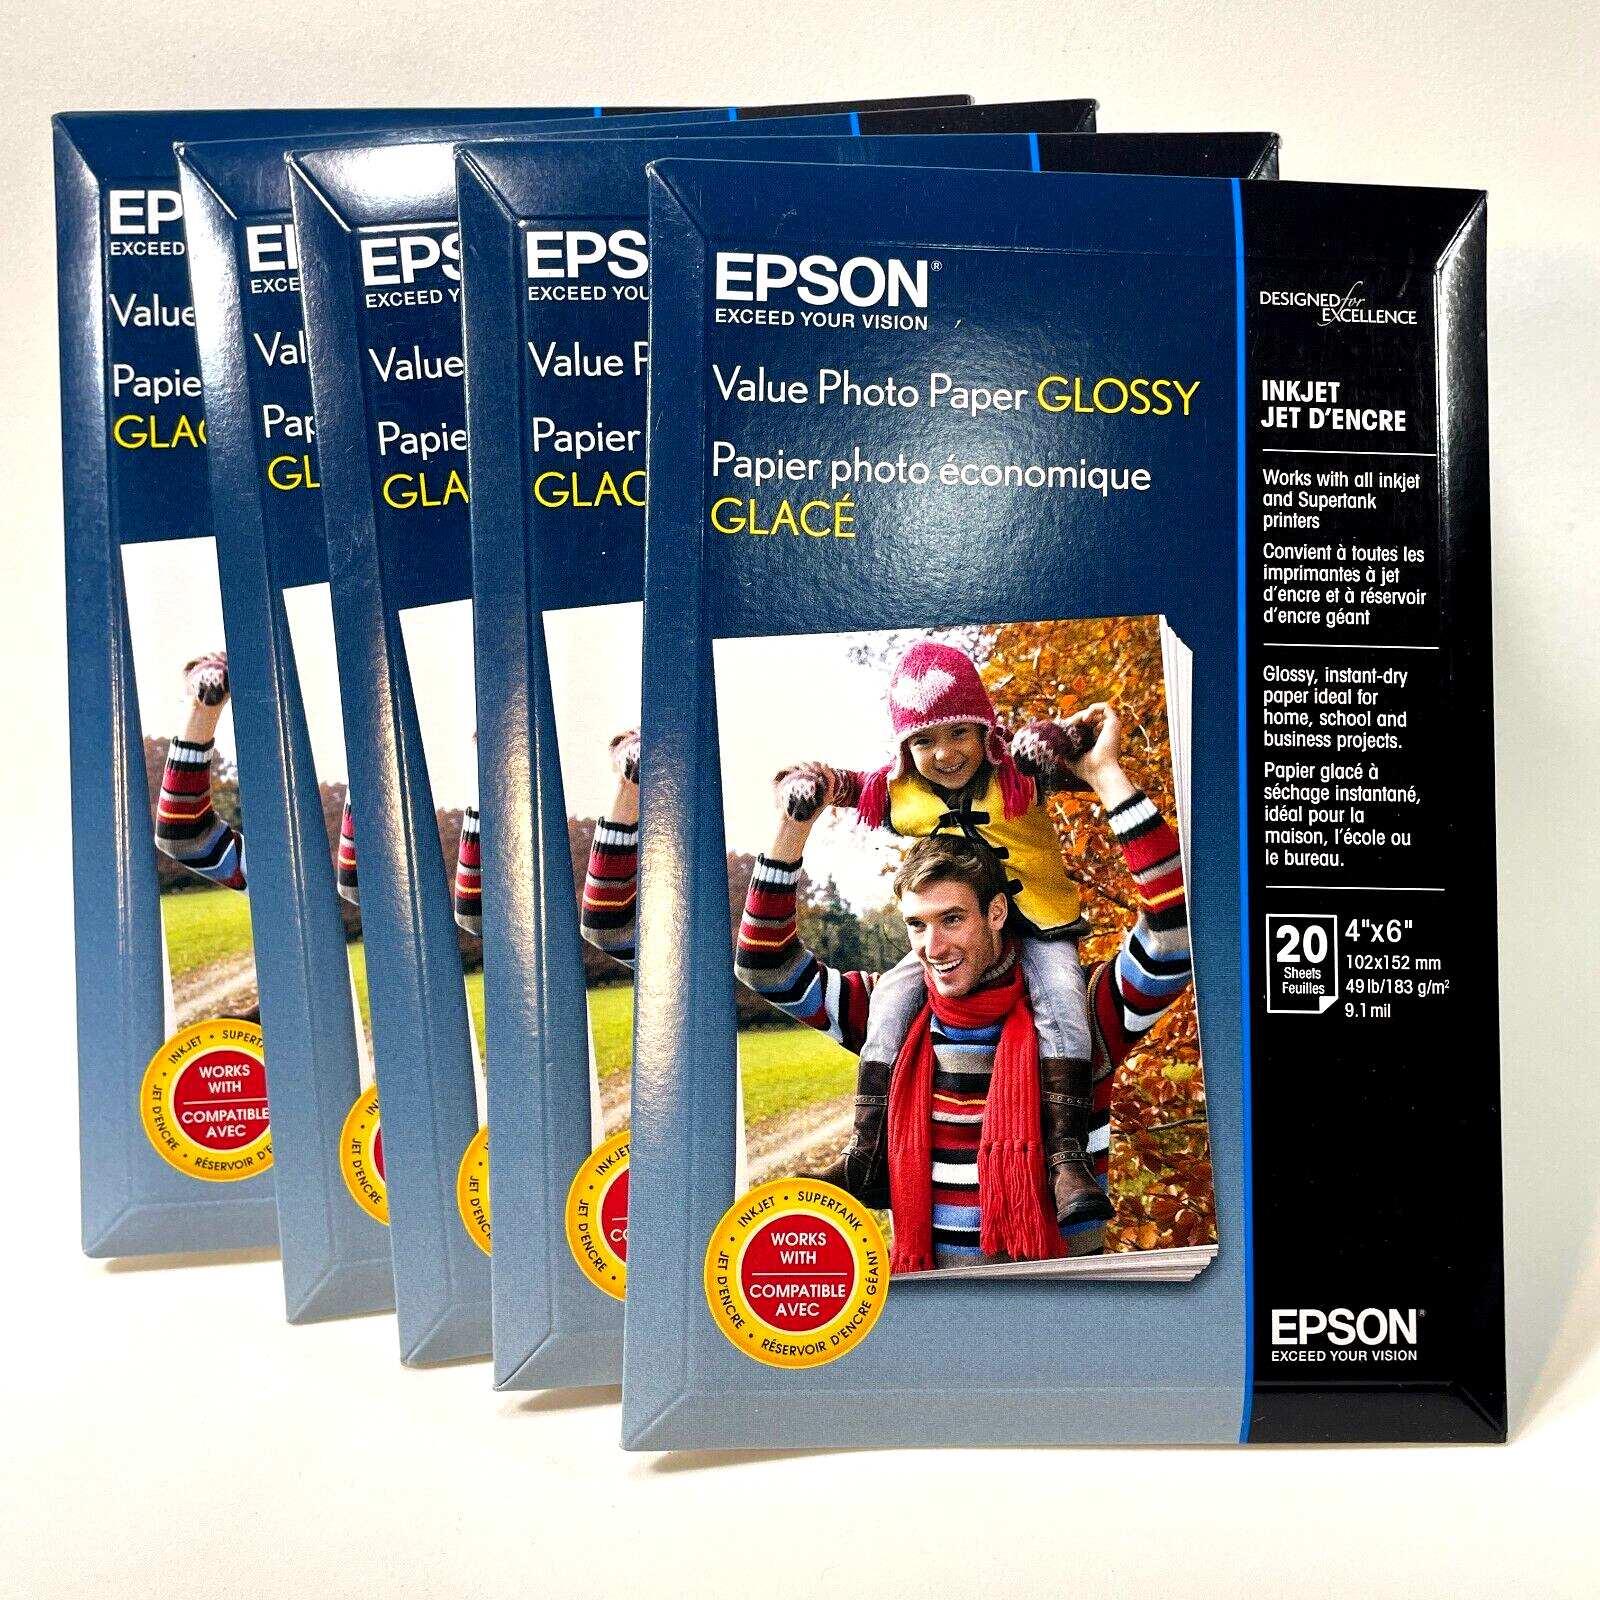 Epson Value Photo Paper Glossy 20 Sheets 4x6